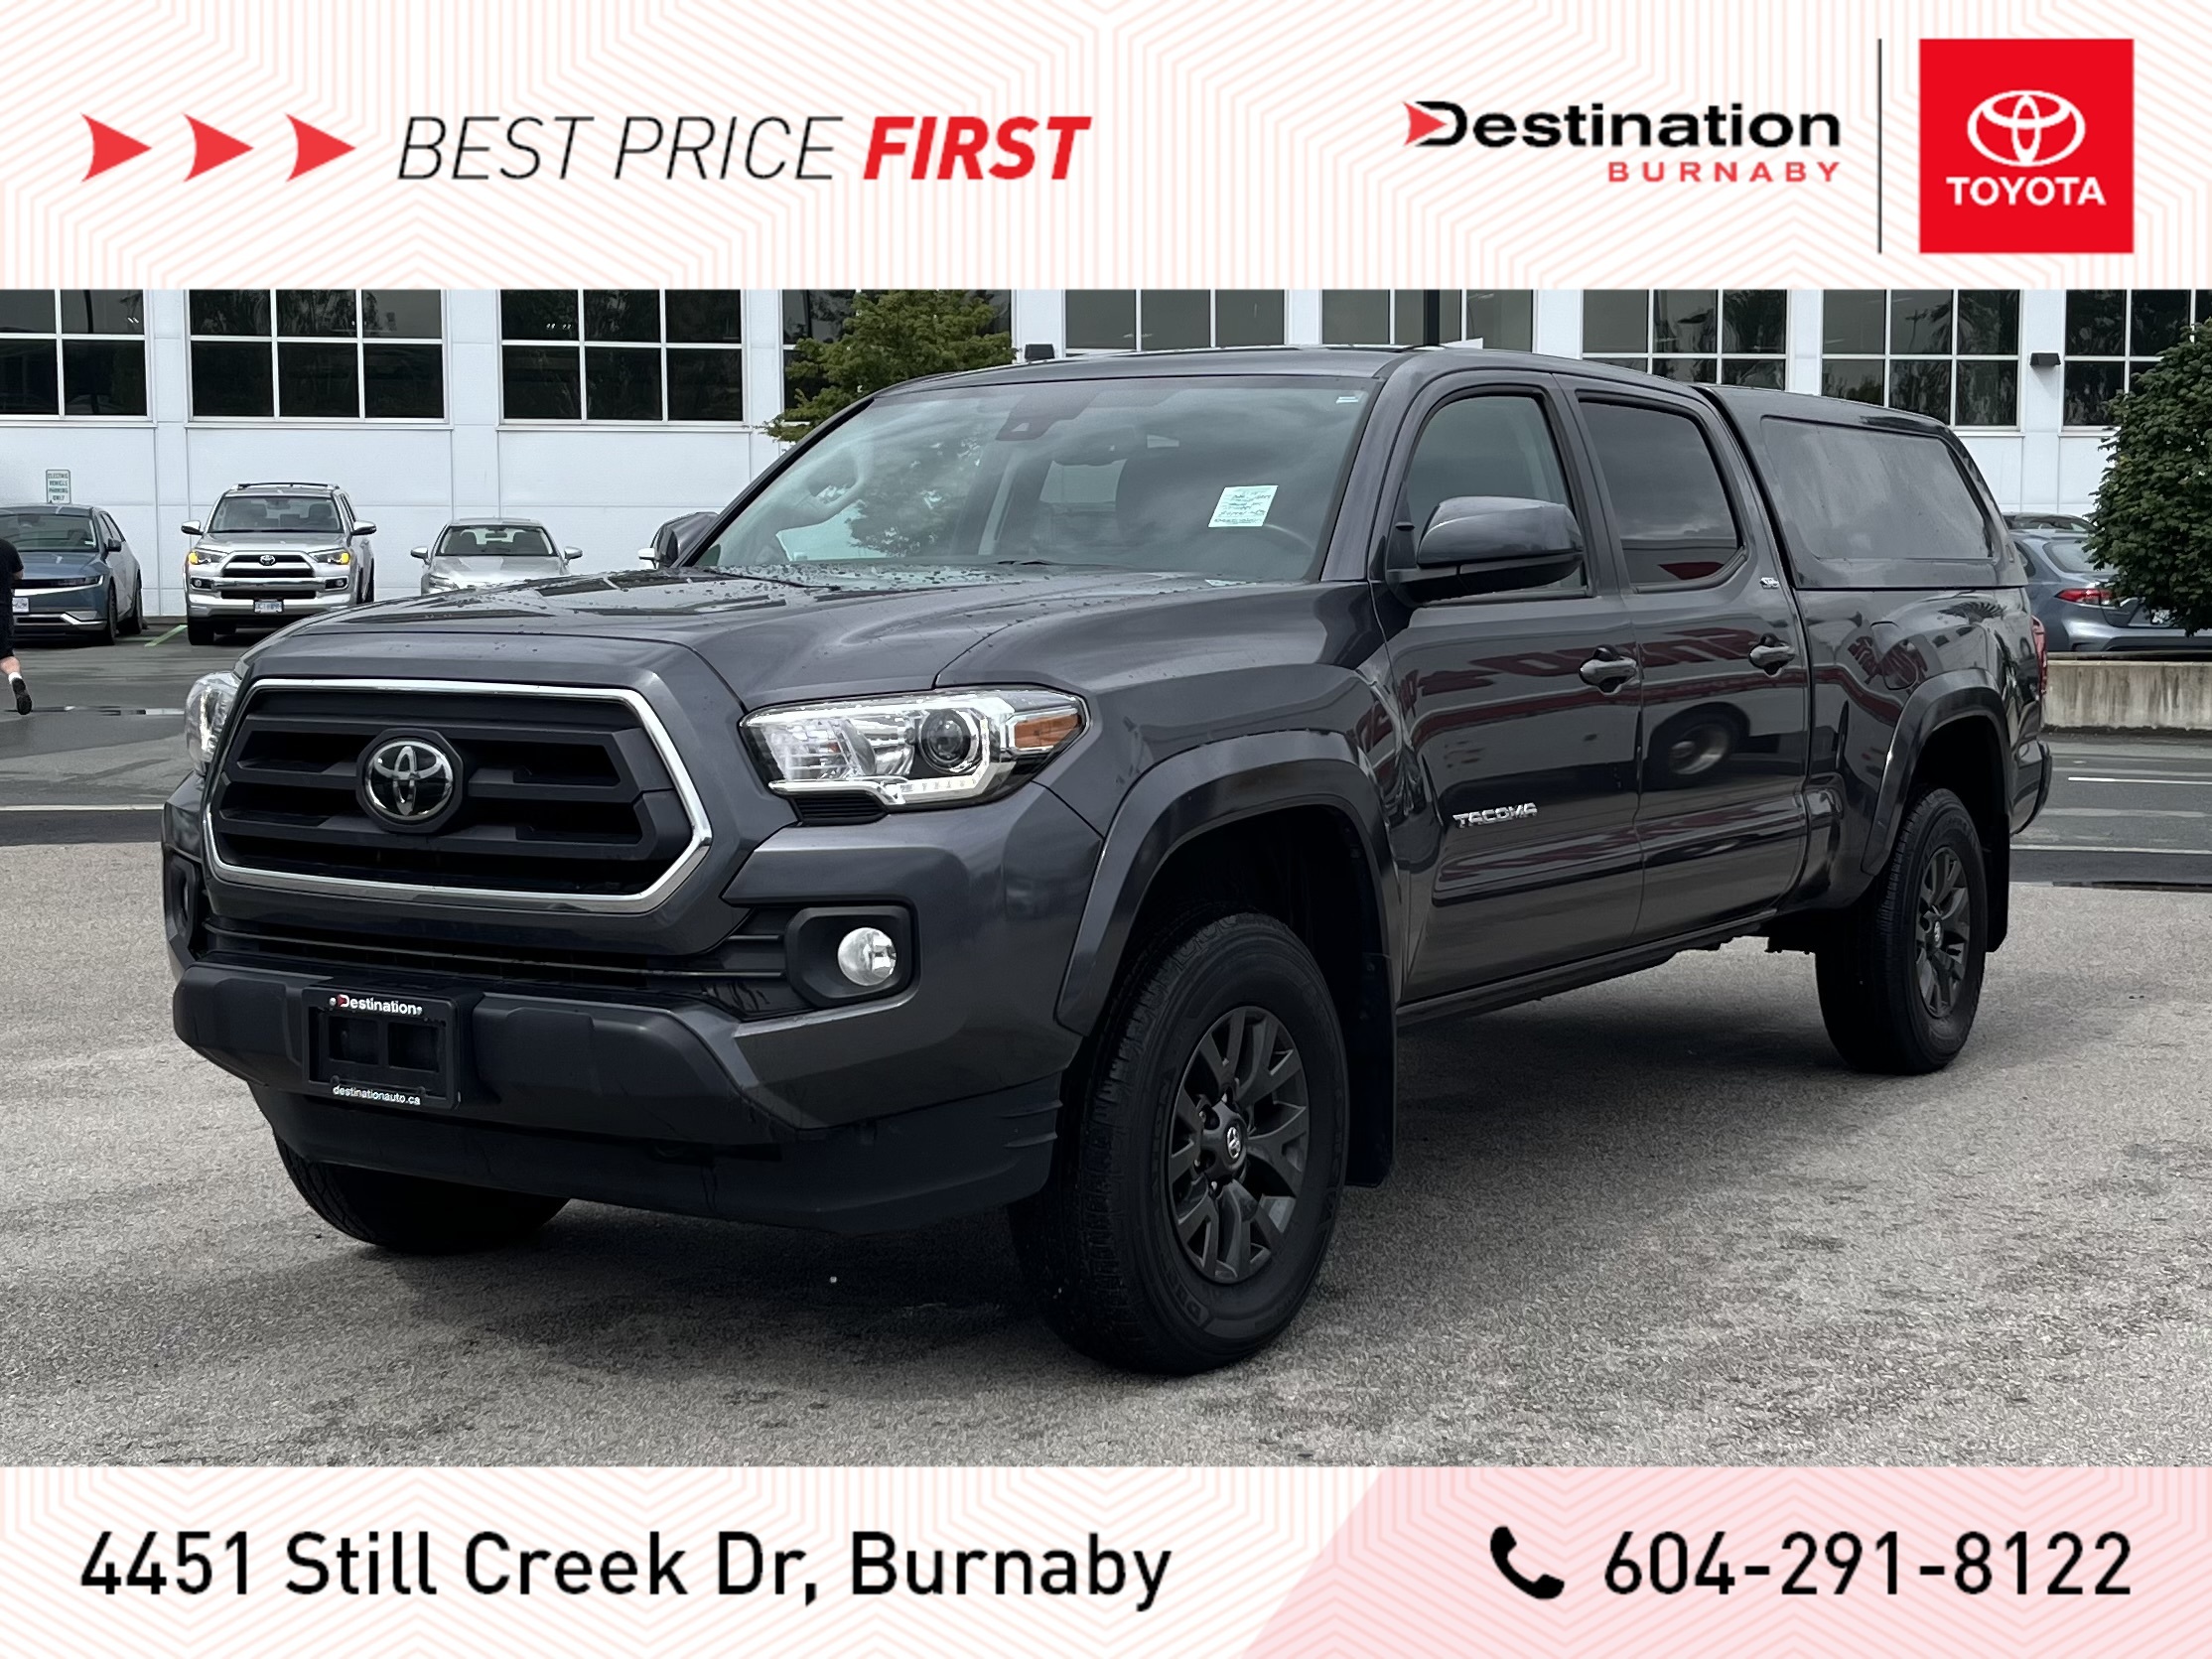 2022 Toyota Tacoma Dbl Cab SR5, Low Kms, No accidents, Canopy